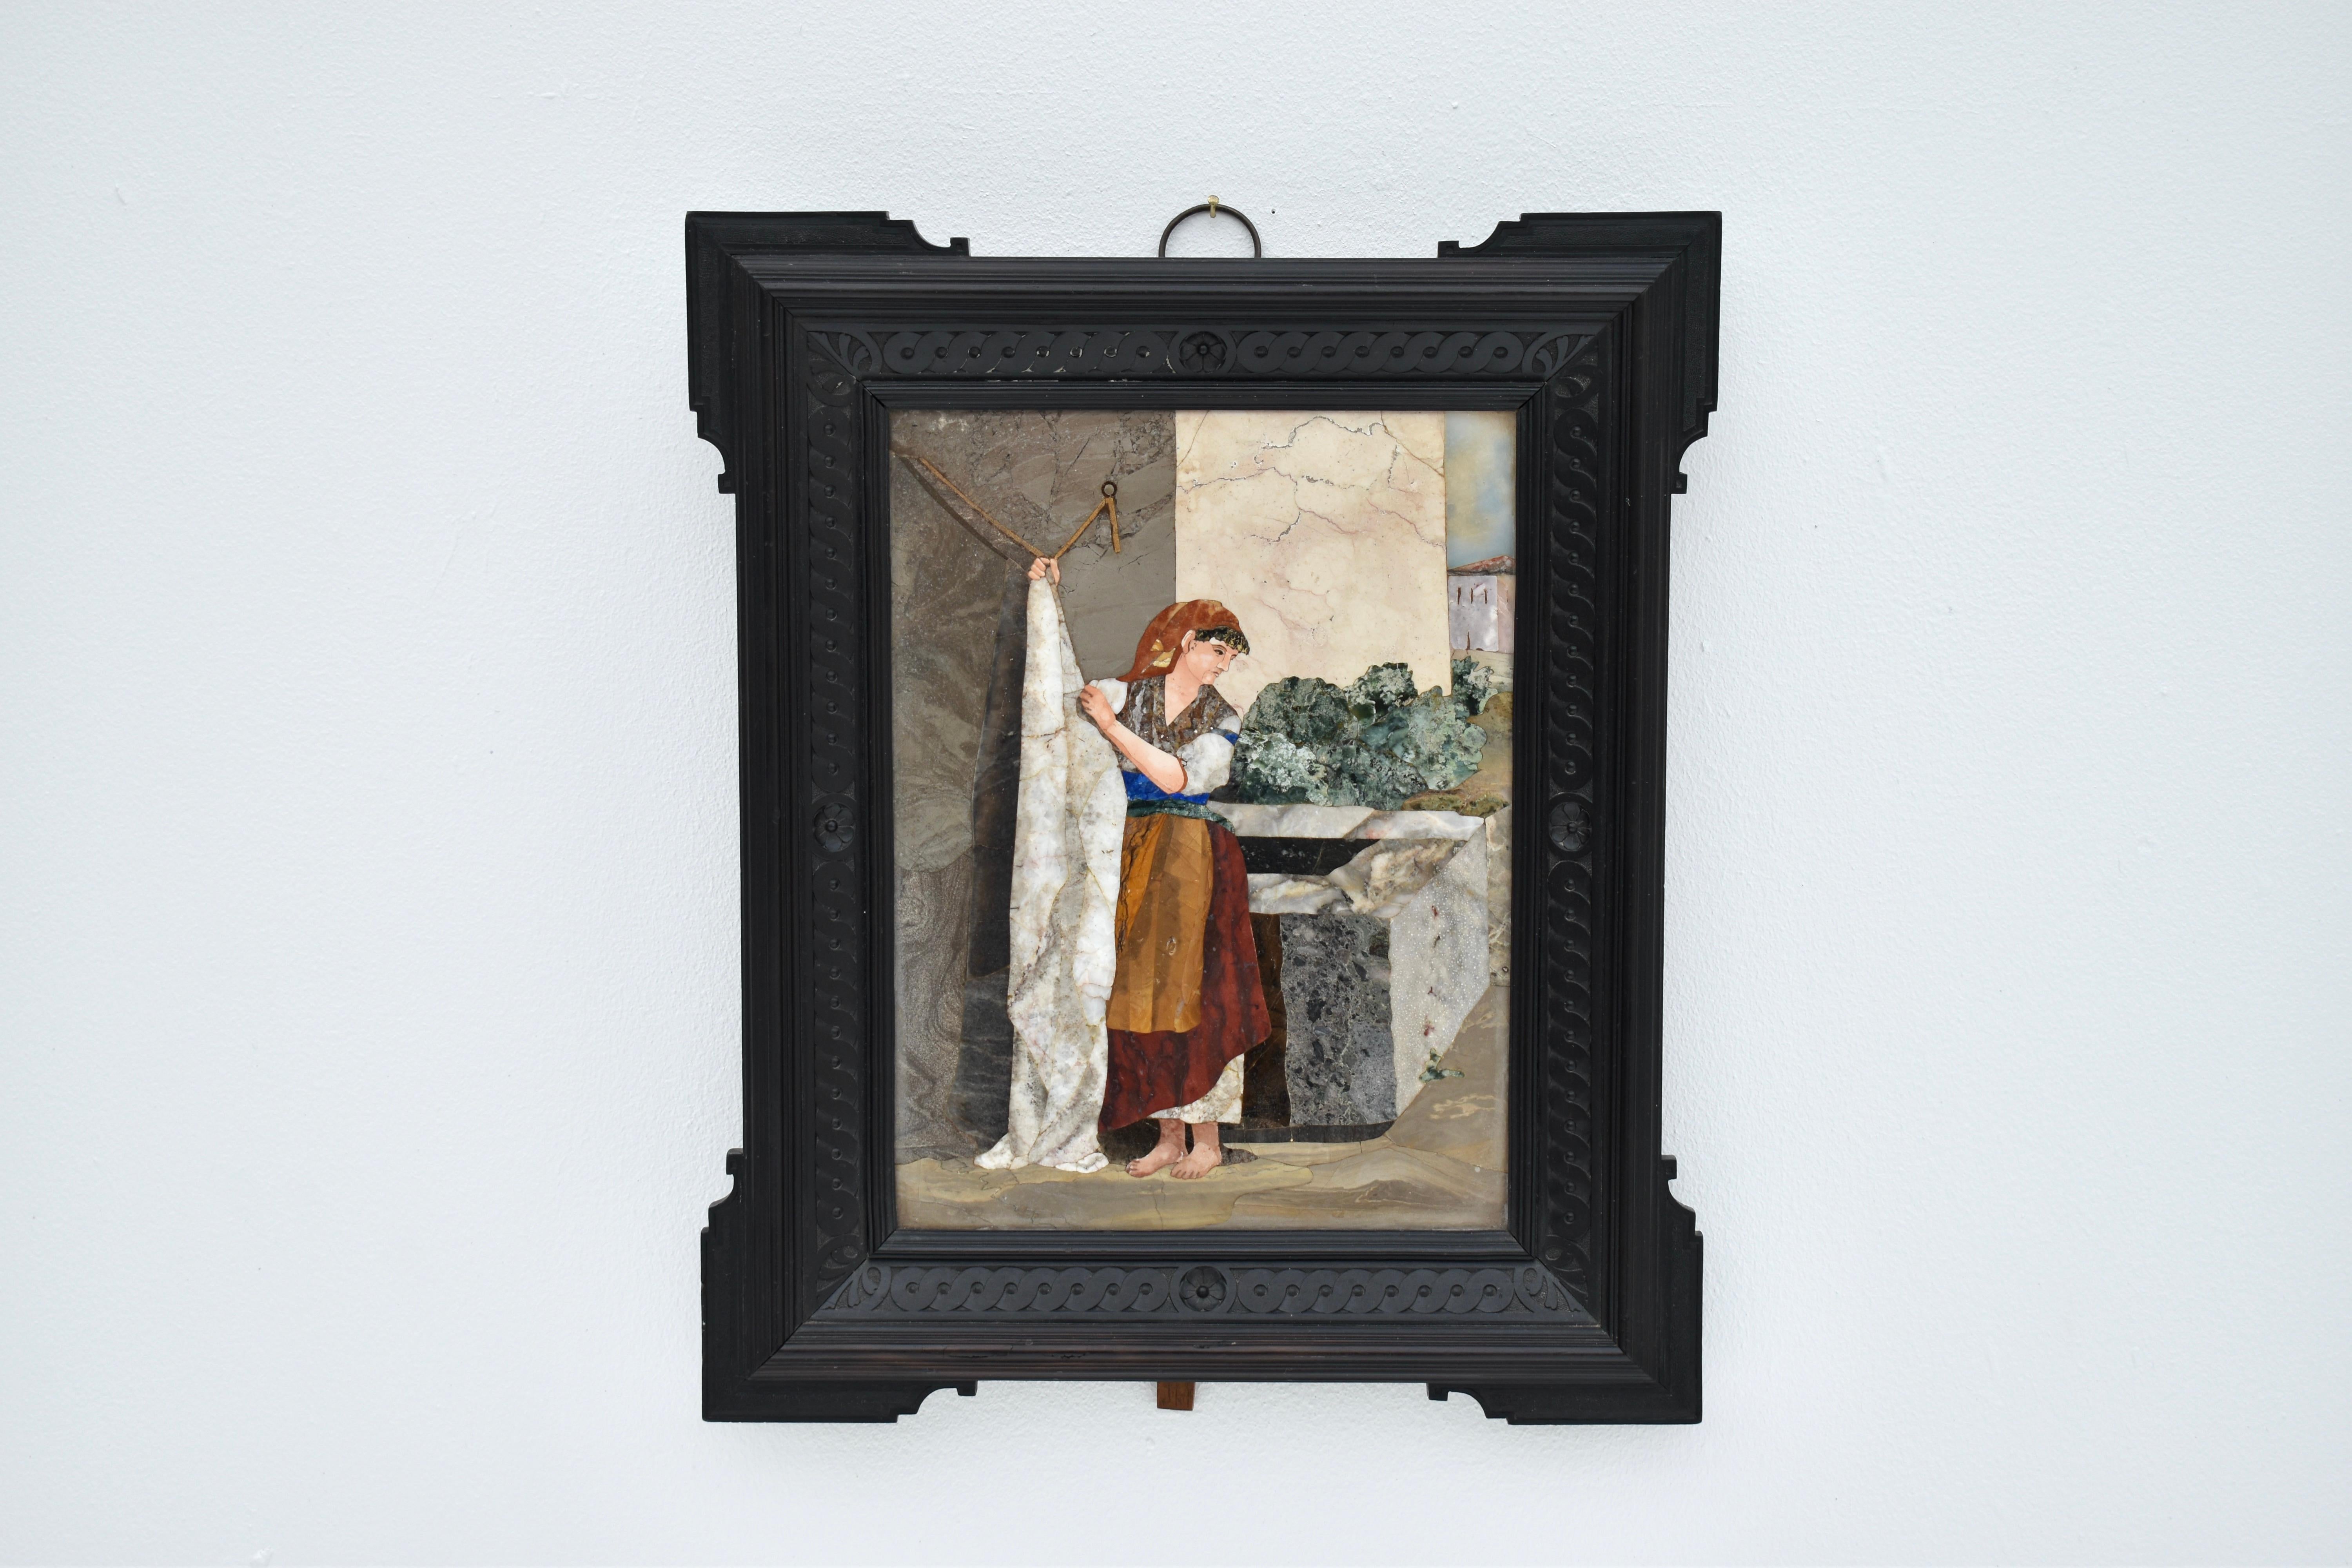 A very fine Mid 19th Century Pietra Dura inlaid panel depicting an Italian street scene. A very pleasing composition crafted from cut marble and other selected semi precious stones such as Lapis Lazuli.

Complete with the original ebonized hand